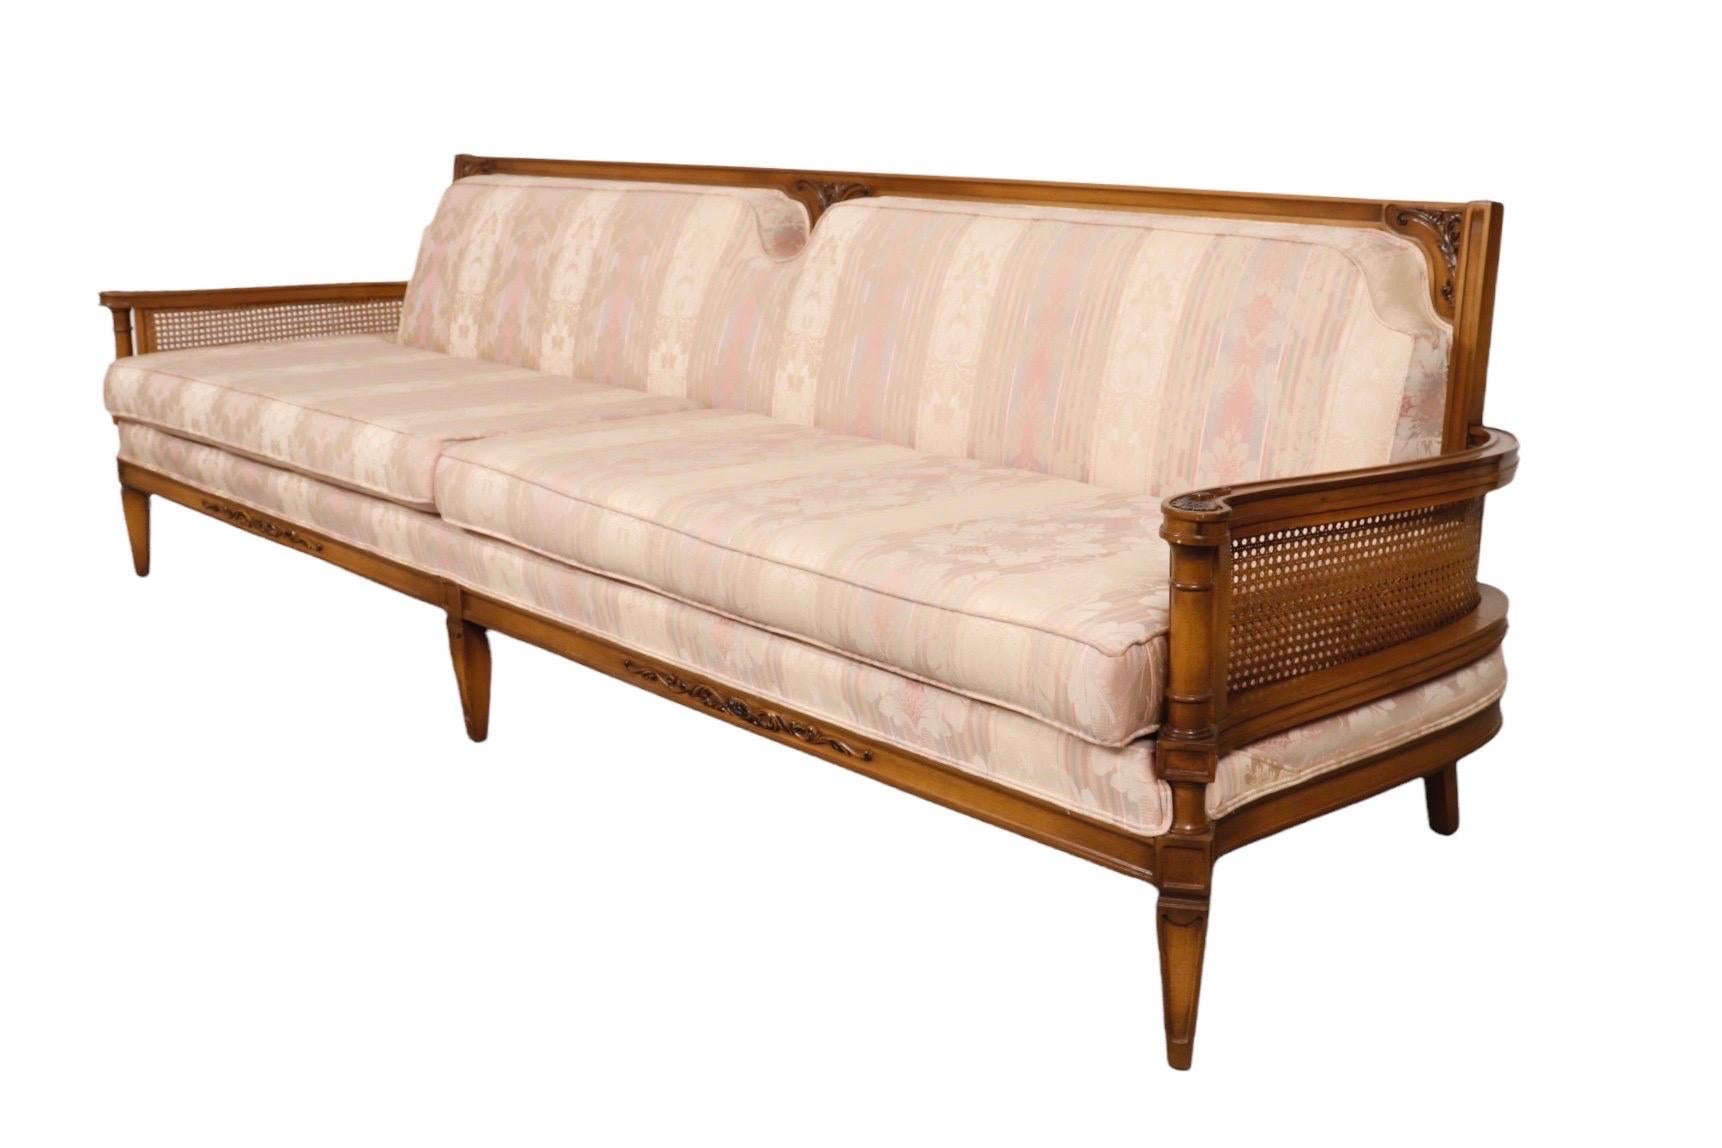 A large neoclassical style caned sofa. Clean lines throughout with a flat crest rail, carved at the center with scrolled acanthus. Outward rolled arms are topped with rosettes above caned side panels. Upholstered with a tight seat back and two long